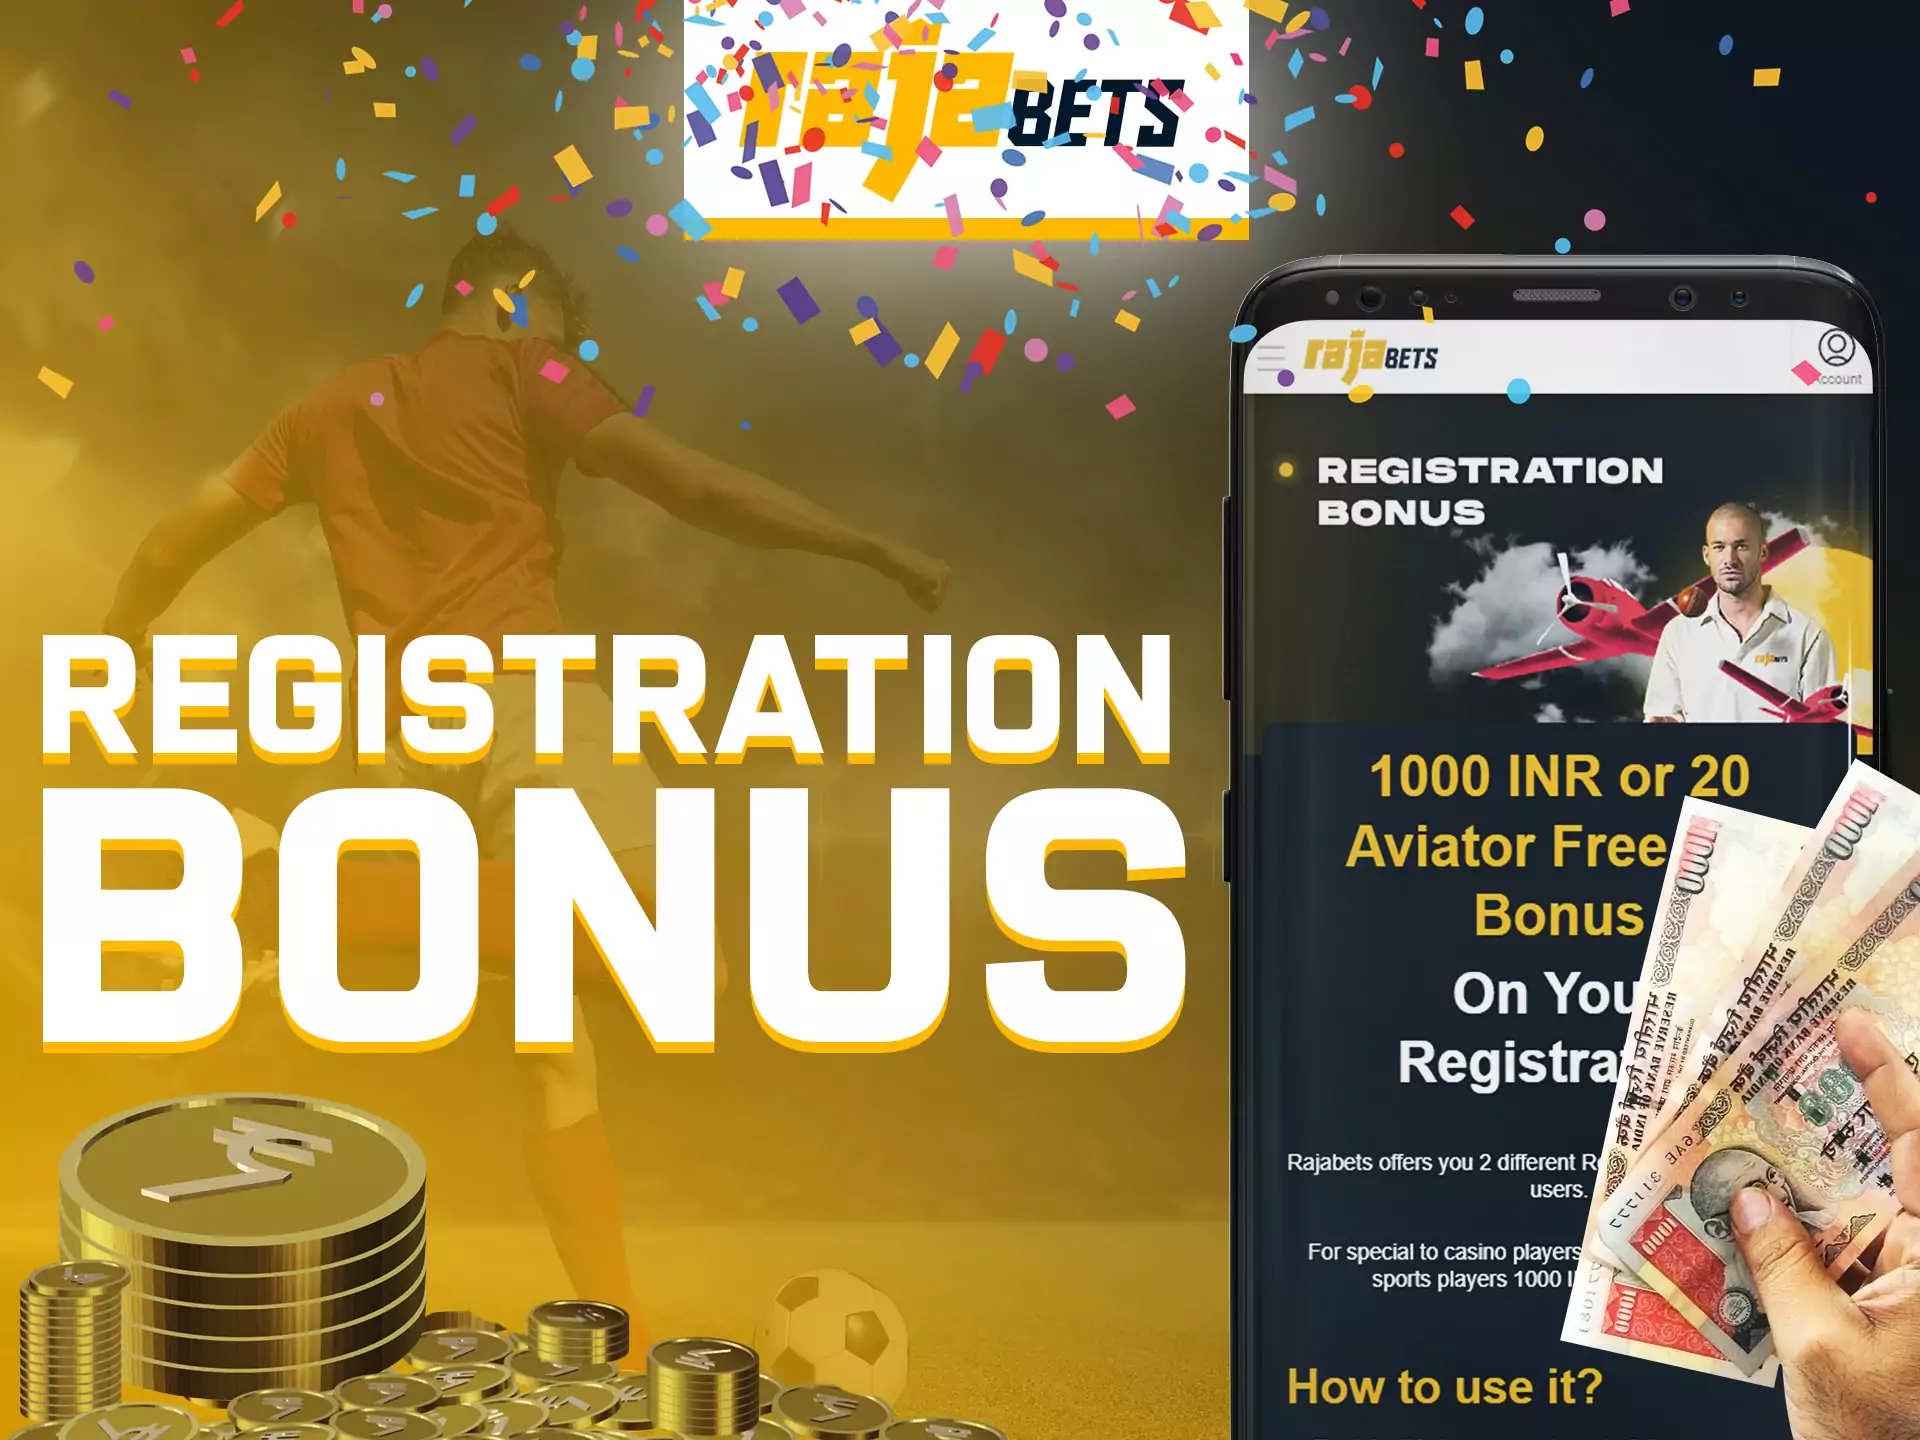 On Rajabets app you will get a bonus right after you register.